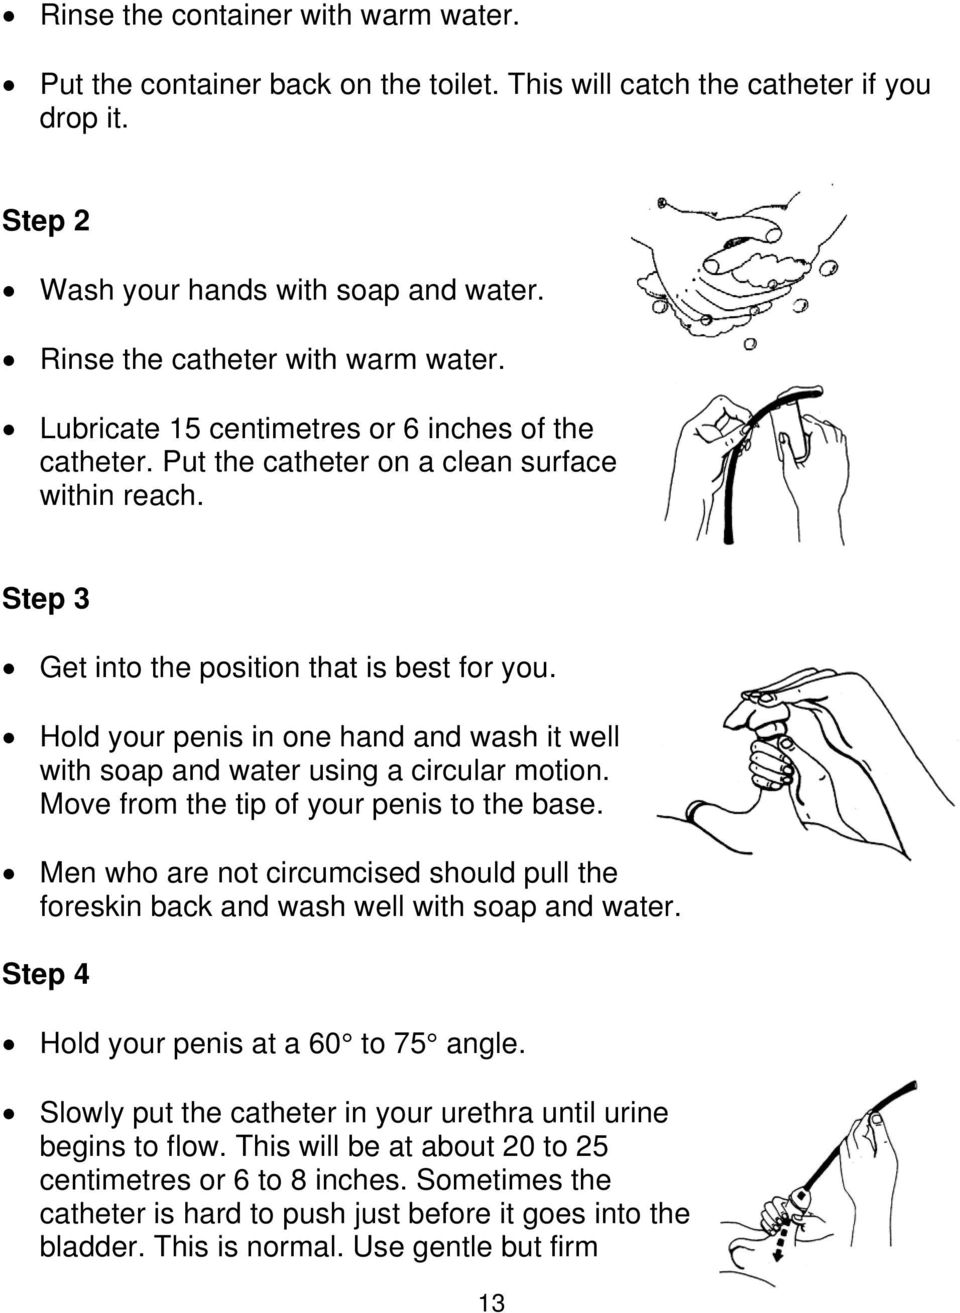 Hold your penis in one hand and wash it well with soap and water using a circular motion. Move from the tip of your penis to the base.